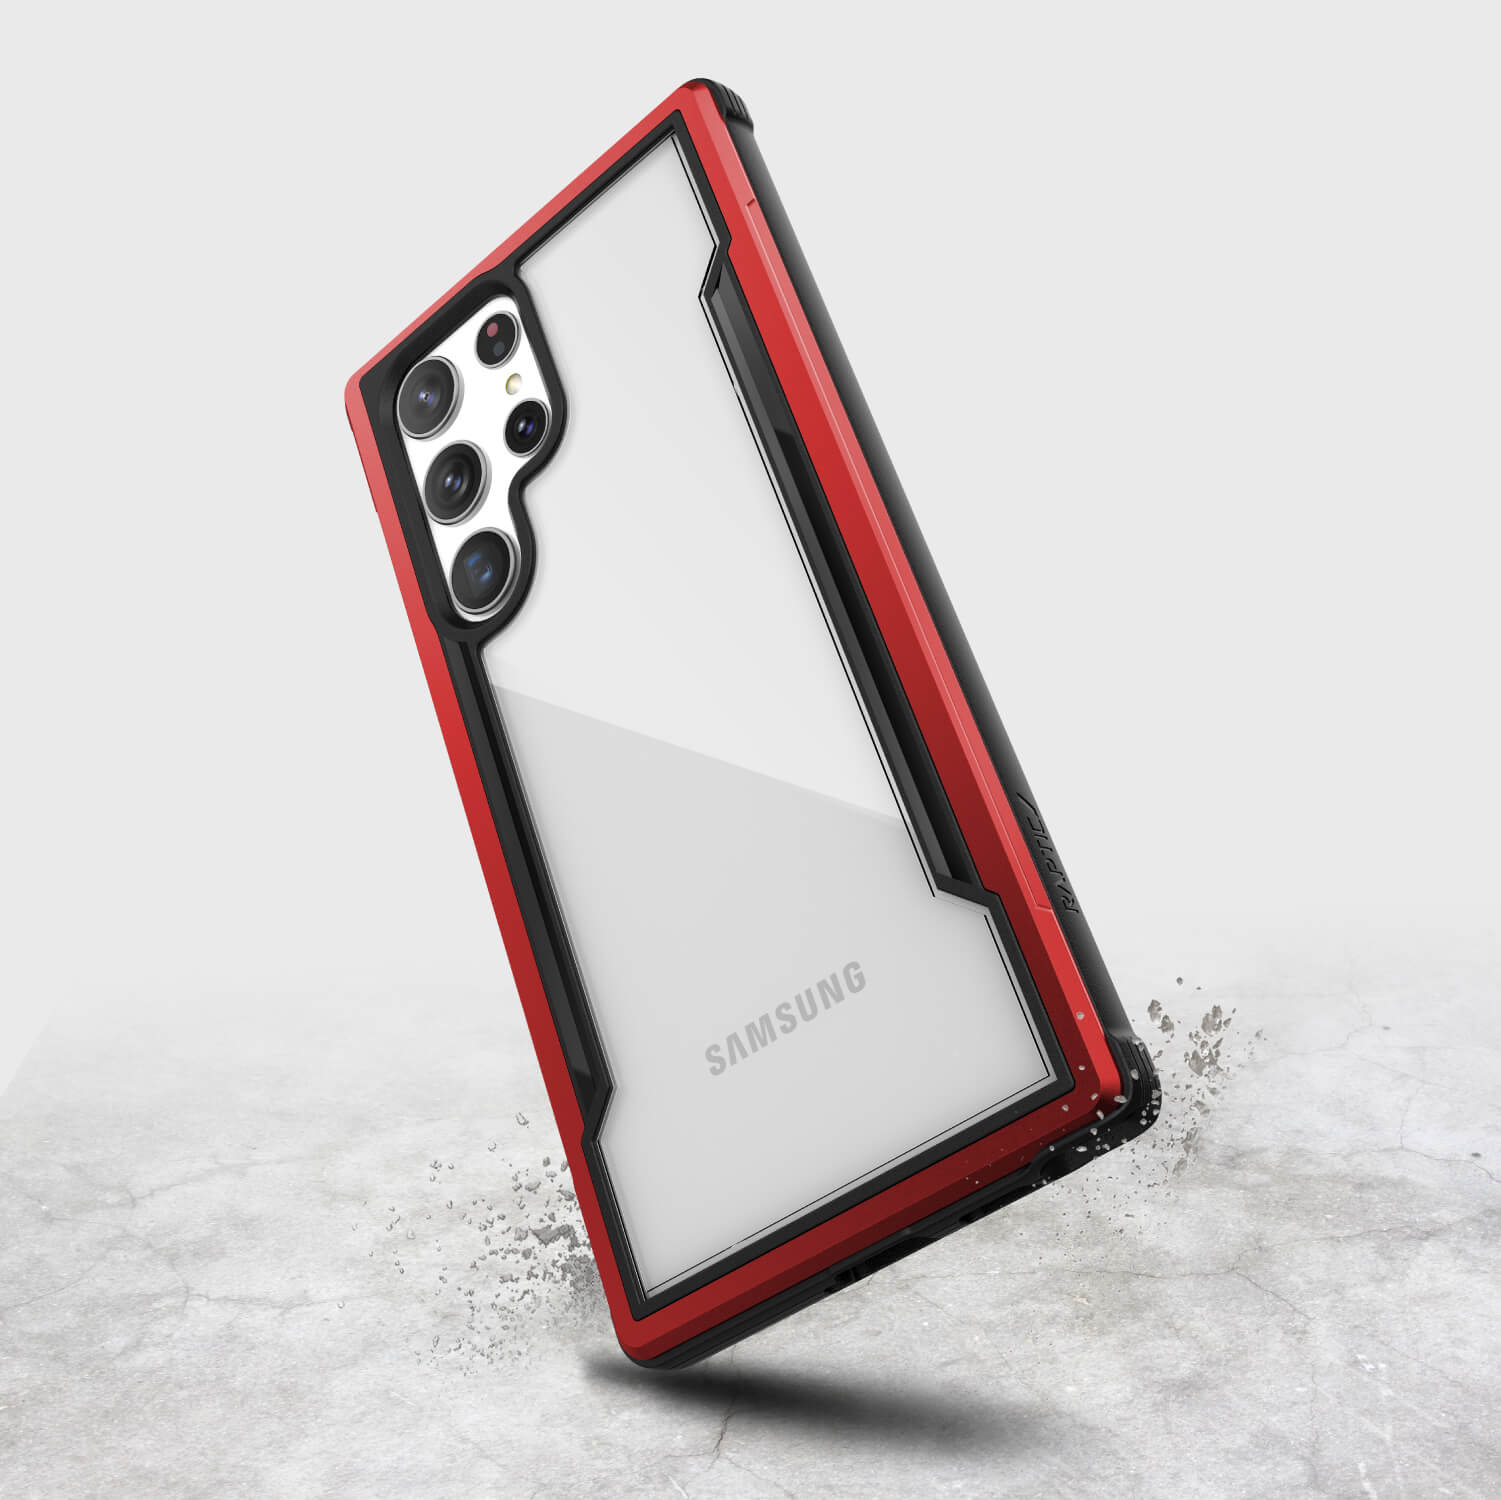 Raptic Samsung Galaxy S22 Ultra Case - SHIELD in red and white.